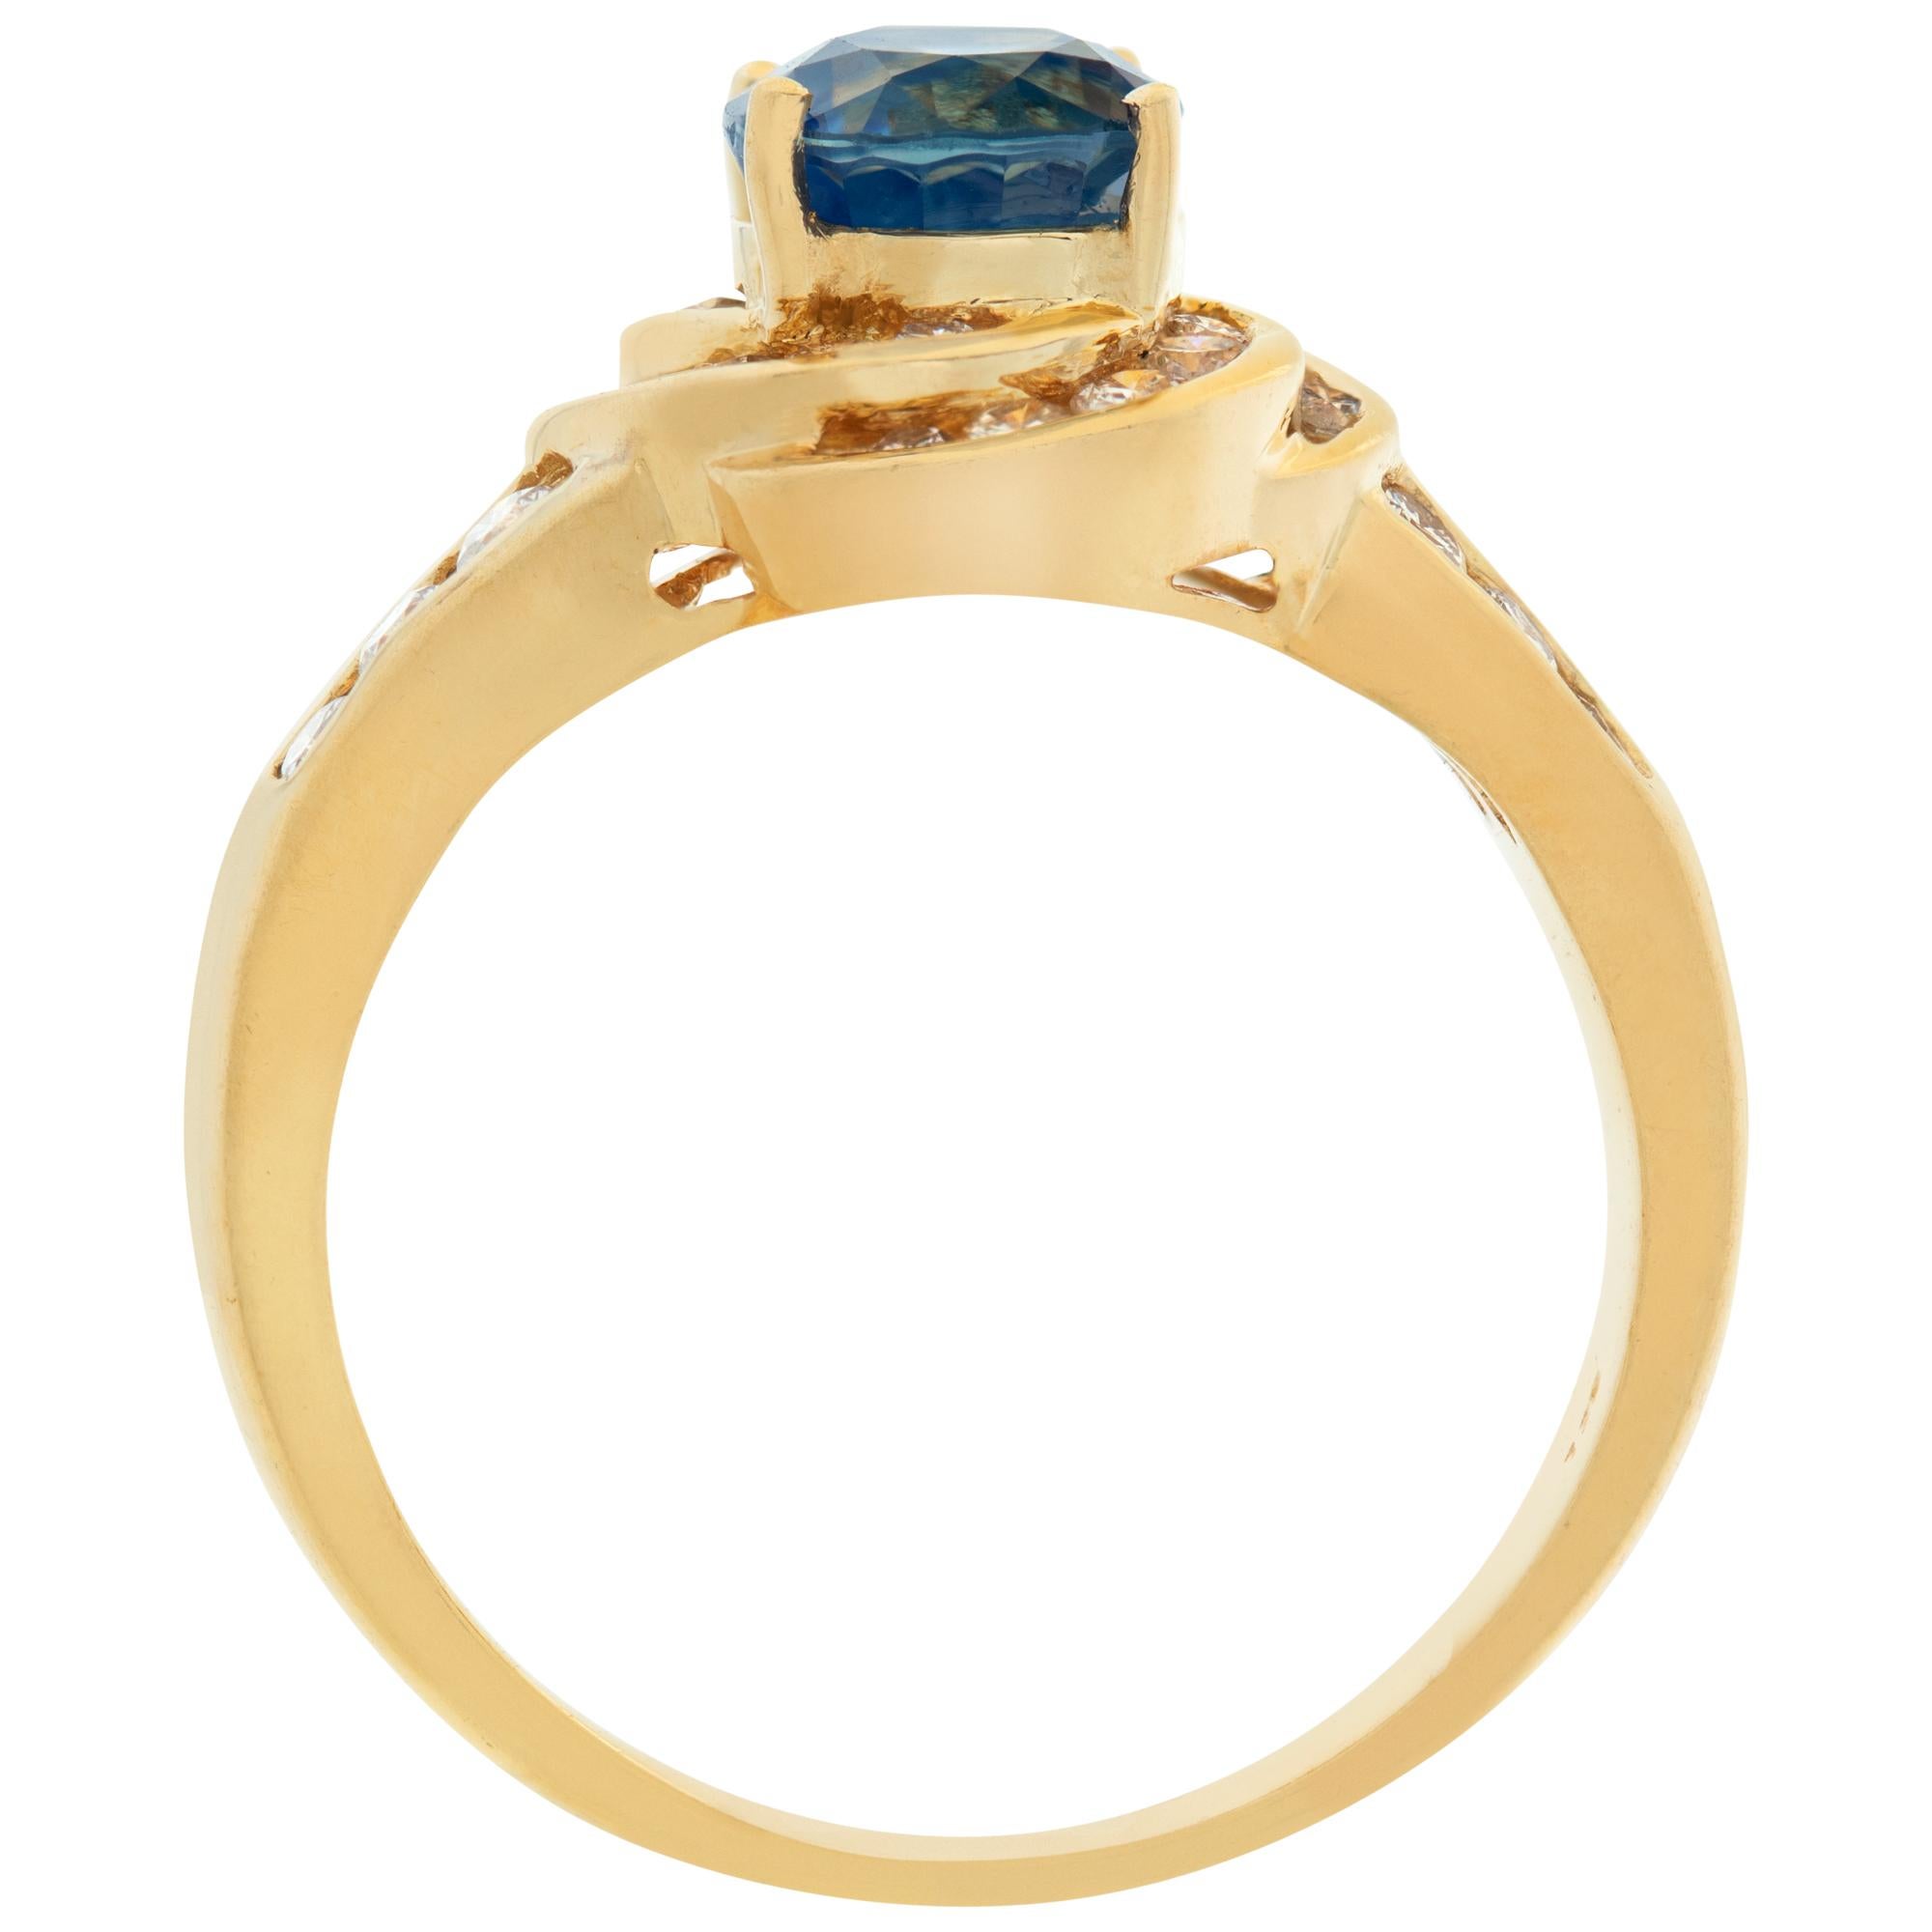 Women's Blue Sapphire 18k Yellow Gold Ring with Diamond Accents